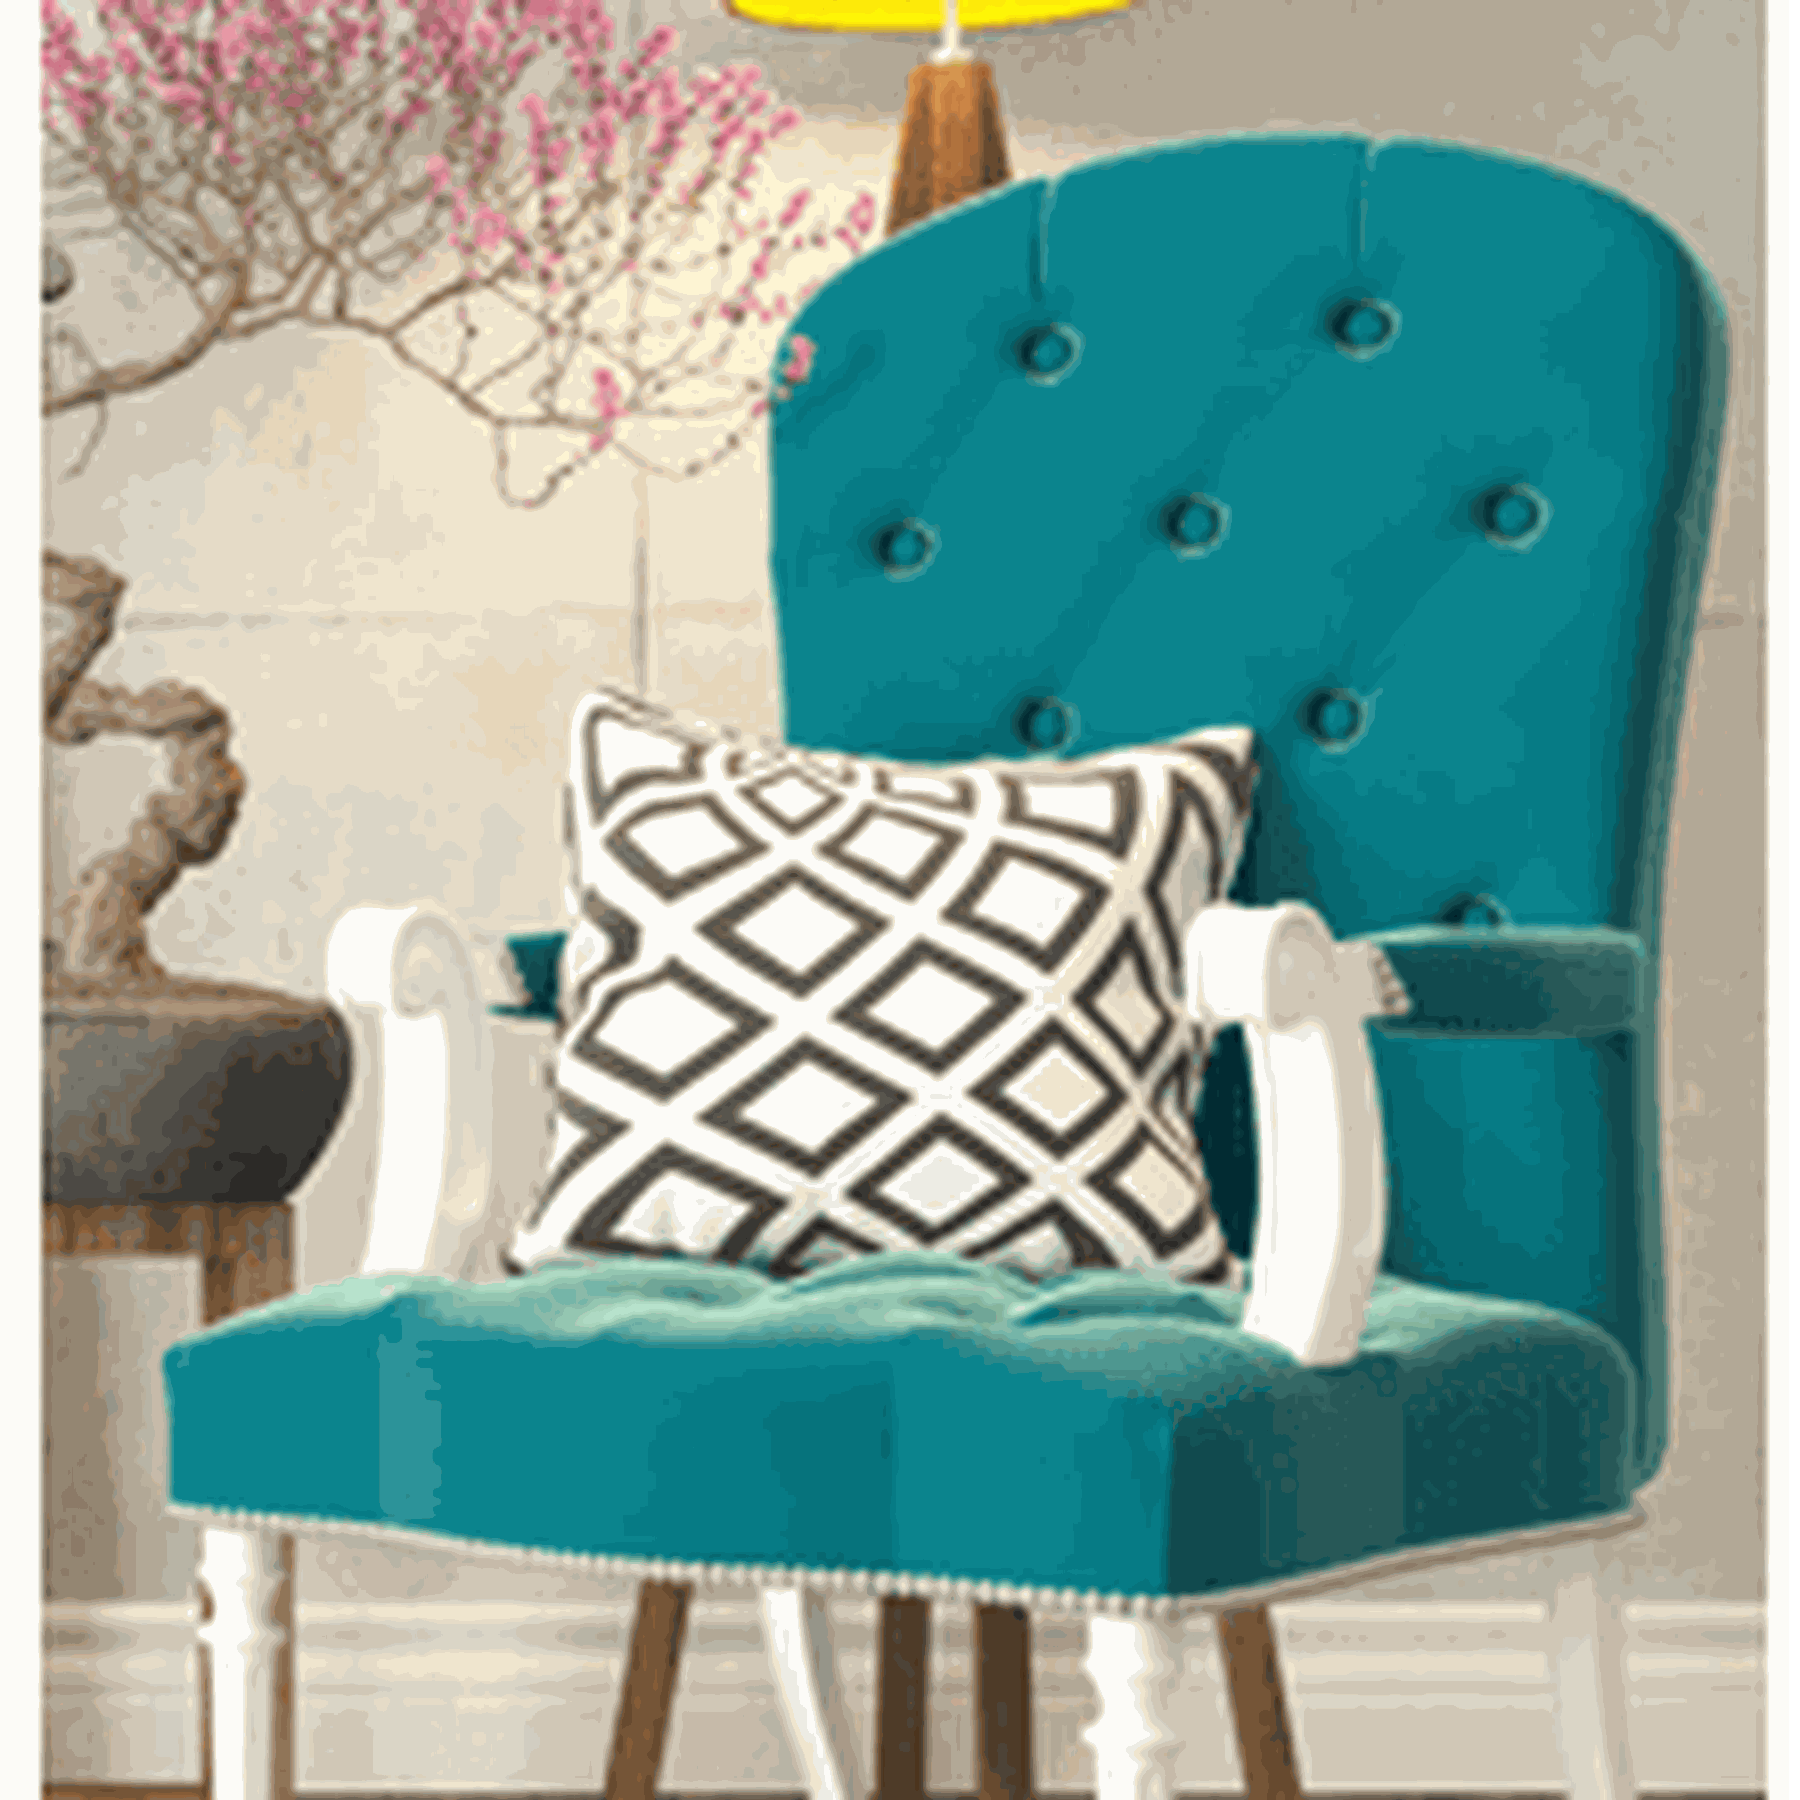 Get furniture & homewares at disounted prices!